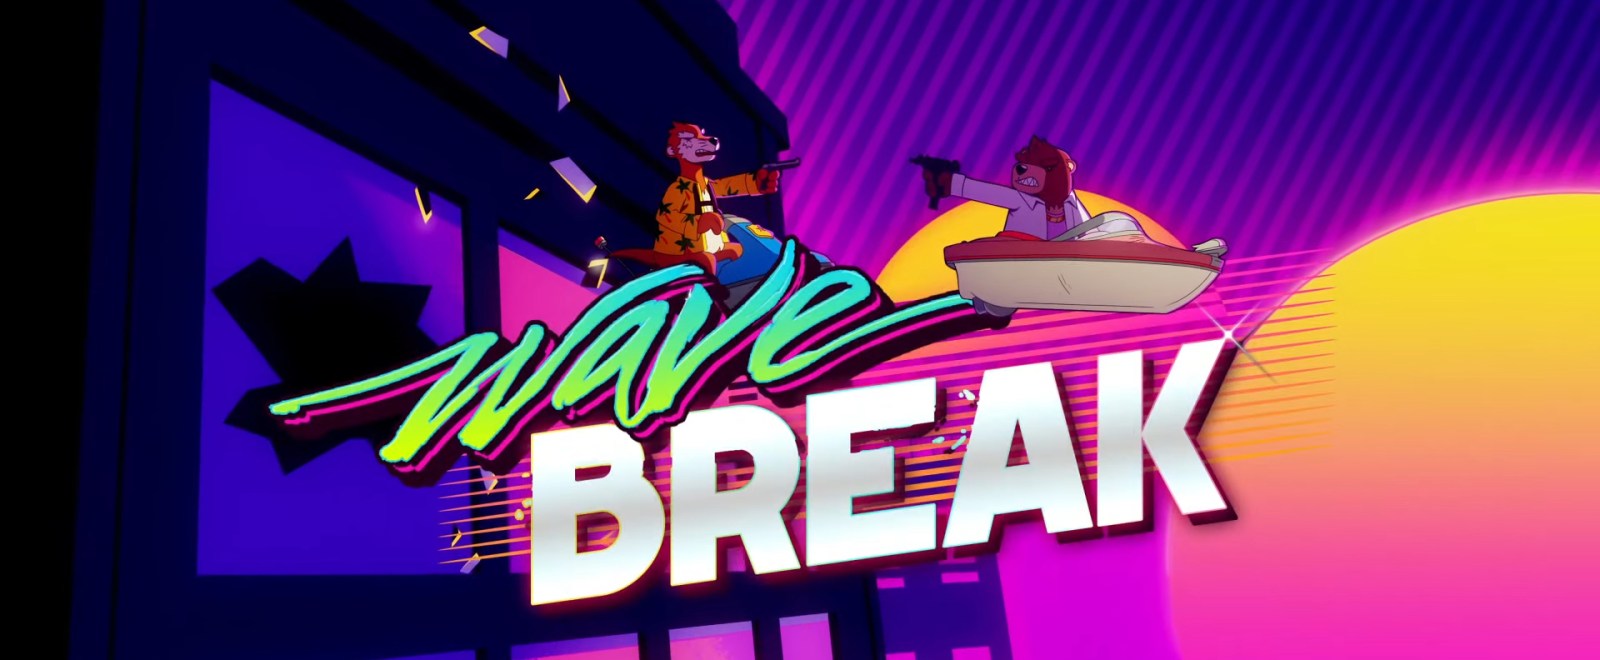 Wave Break Is The World S First Skateboating Game And It Looks Rad As Hell - how to get the jetpack in broken bones iv roblox